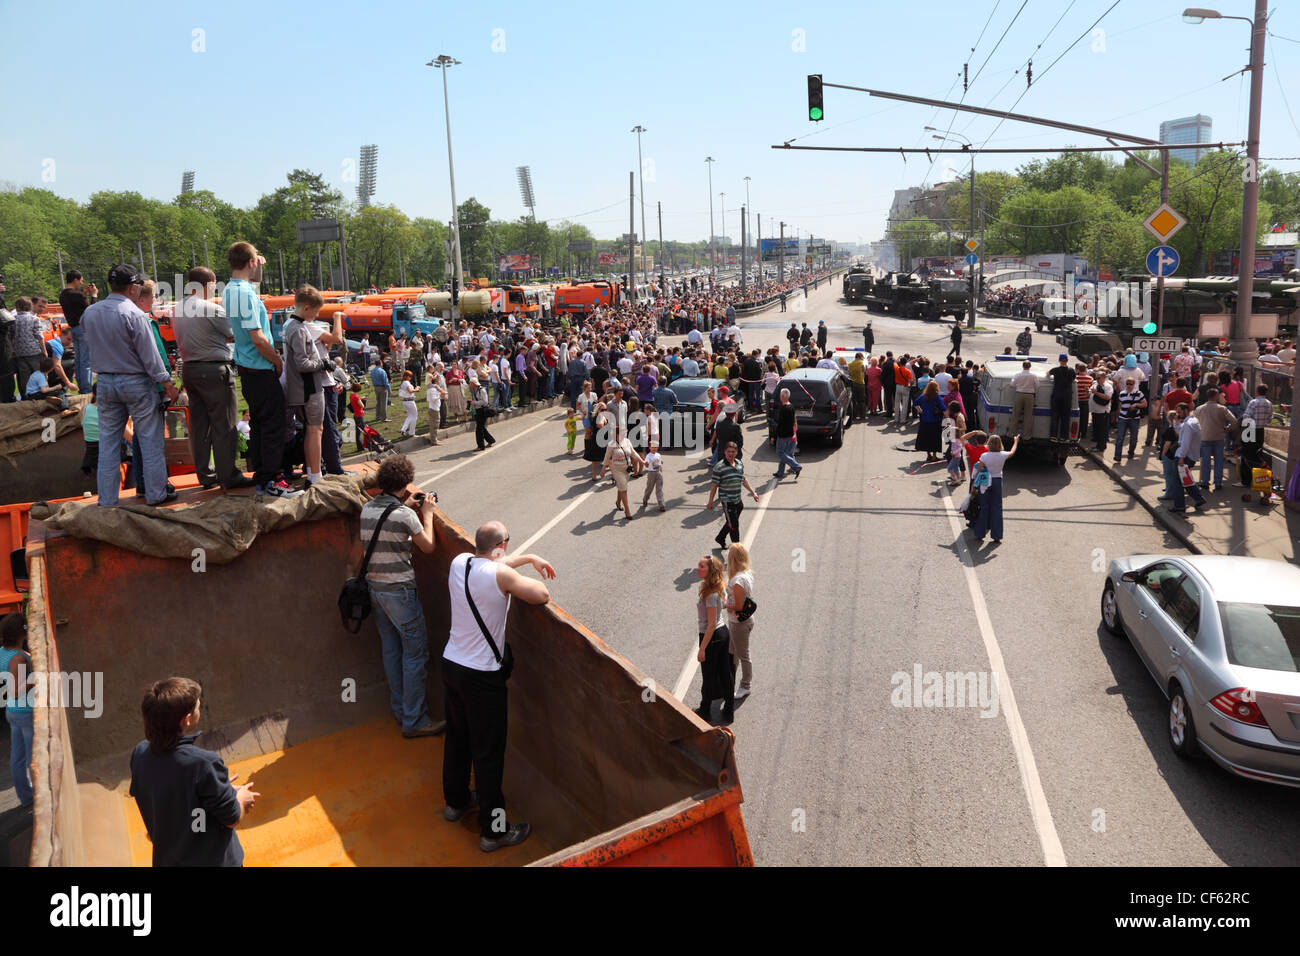 MOSCOW MAY 9 People looks weaponry tank road parade honor Great Patriotic War victory May 9 2010 Moscow Russia View lorry vessel Stock Photo